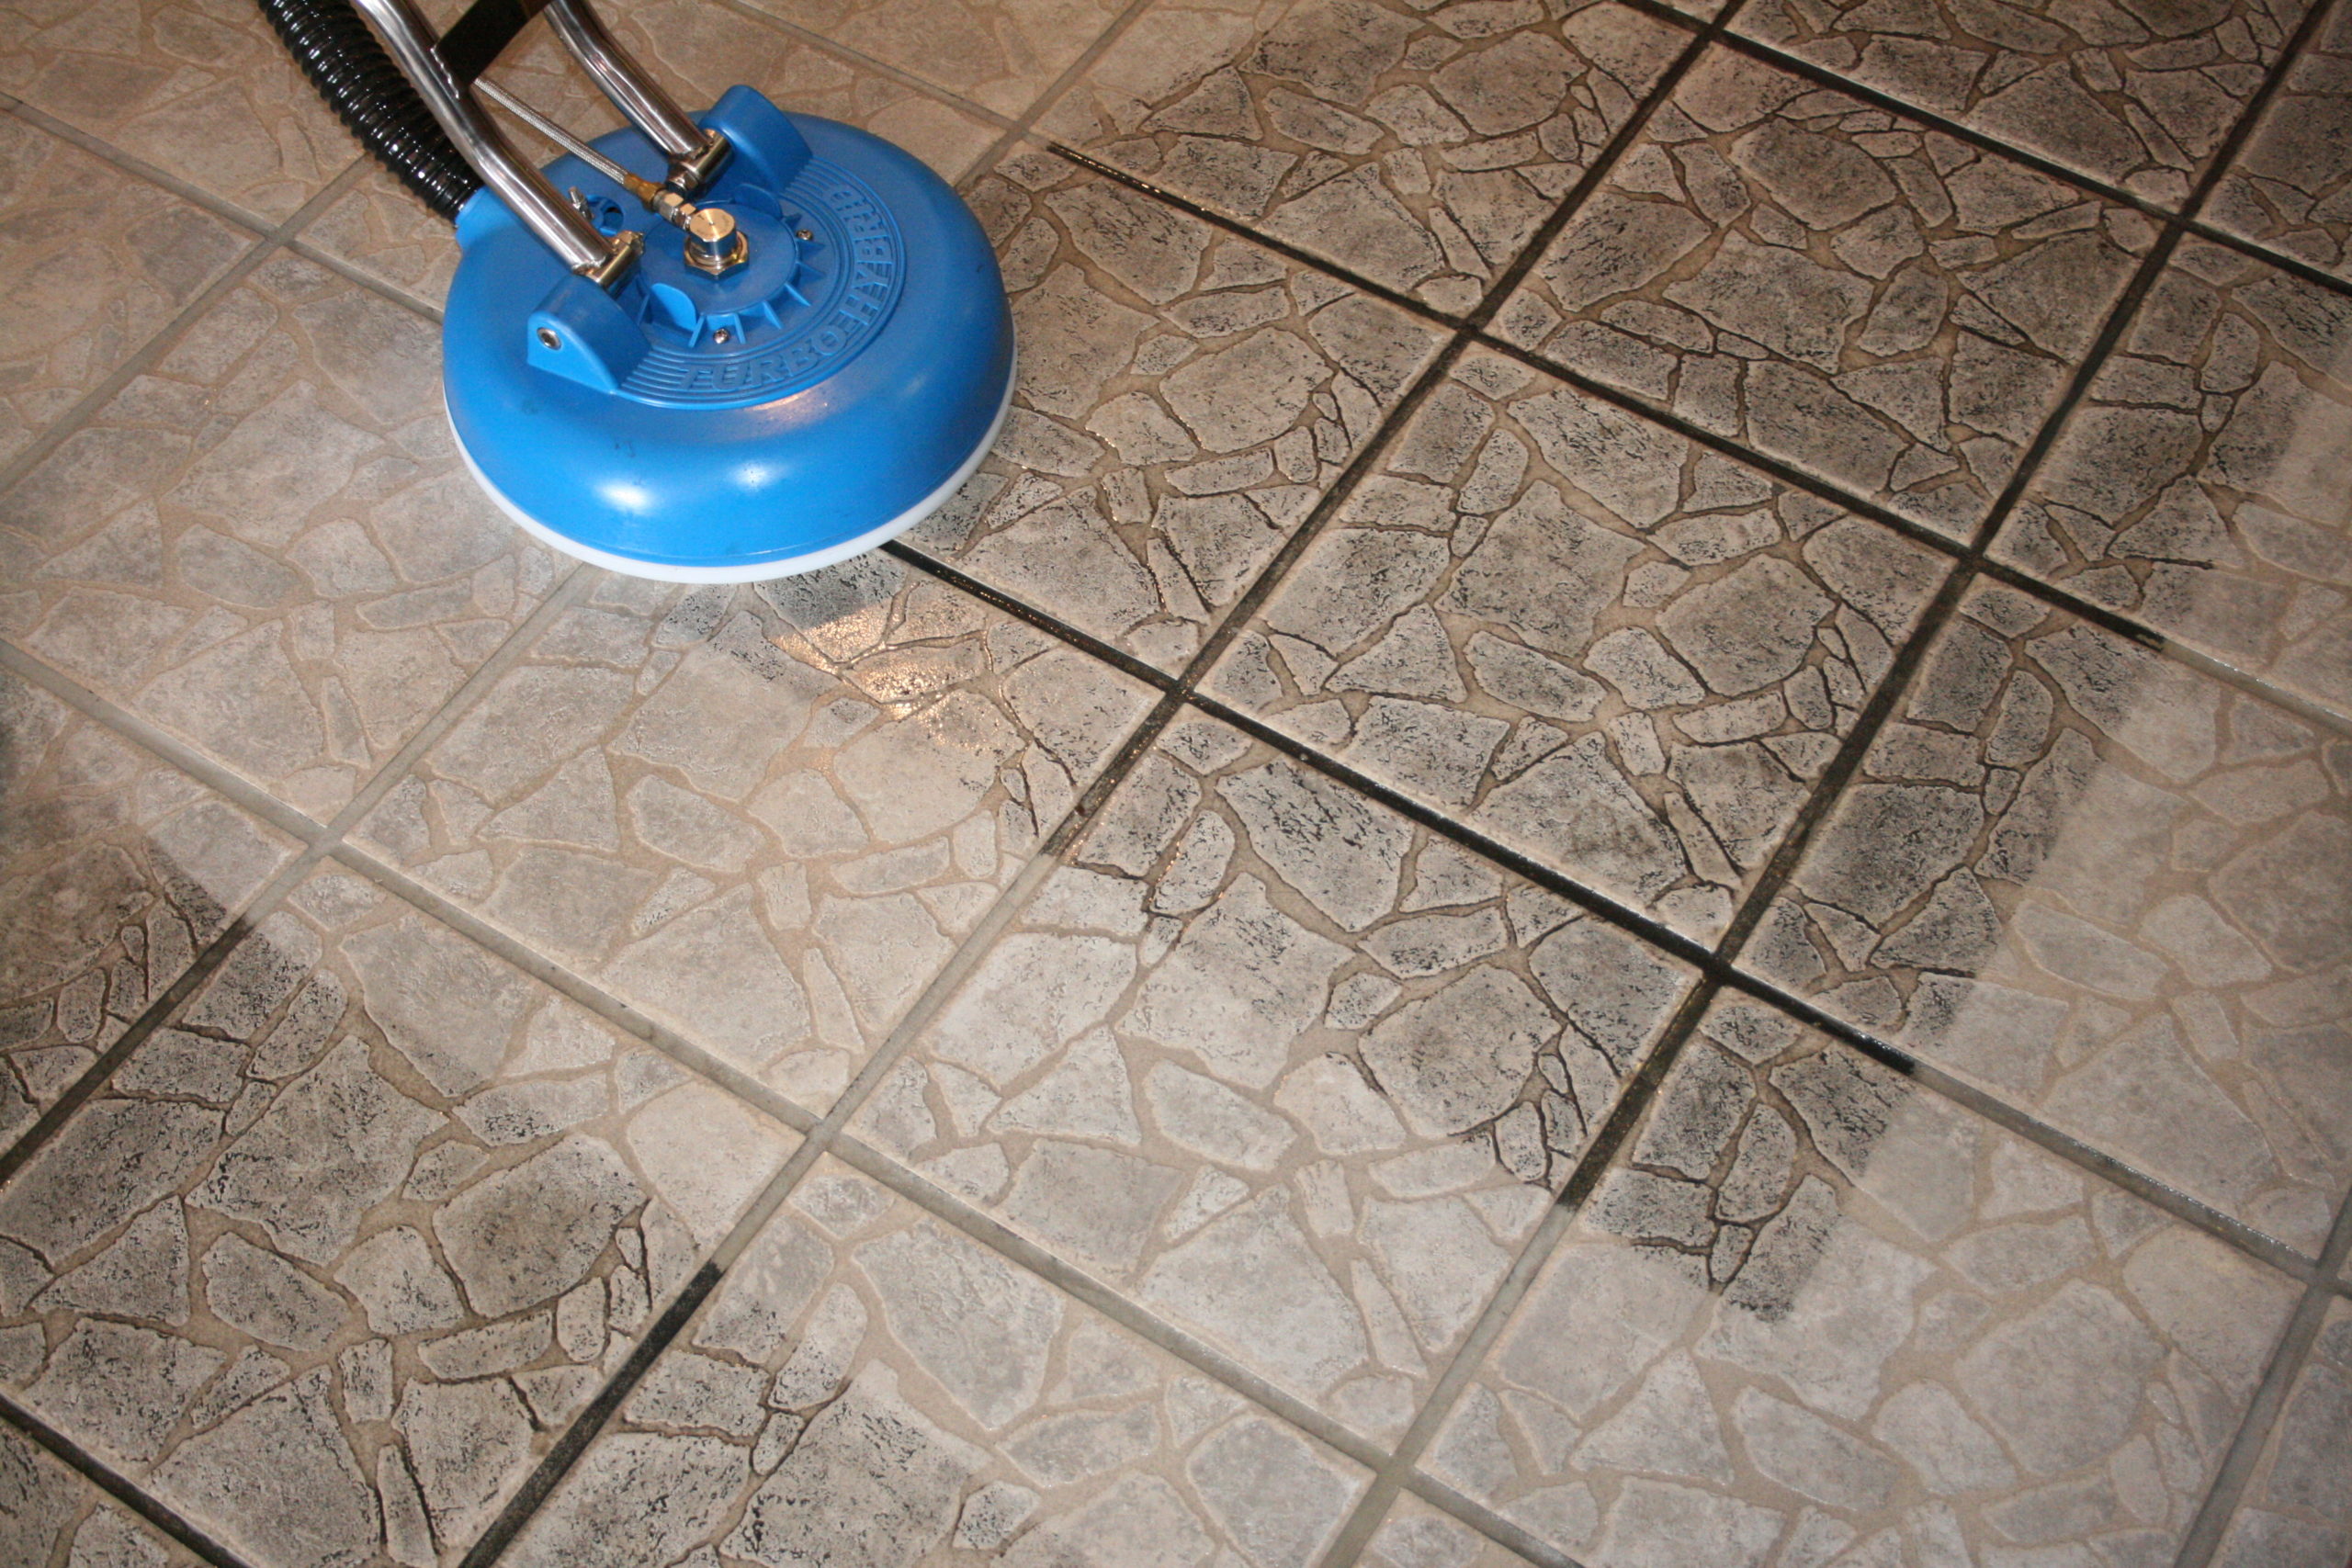 Tile & Grout — Specialized Cleaning and Restoration, Inc.